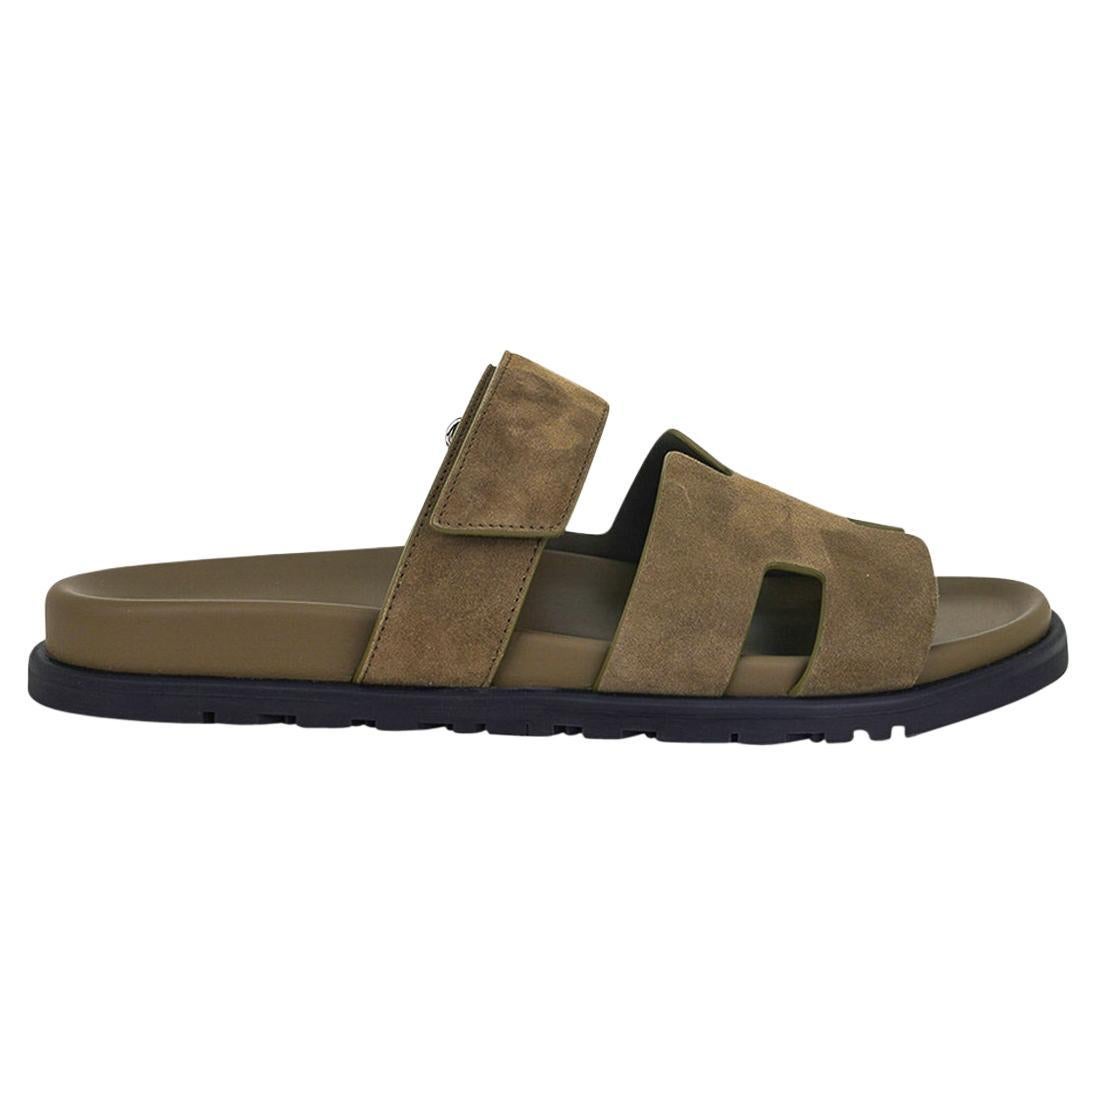 Mightychic offers Hermes Men's Chypre Sandals featured in Vert Toundra.
Suede goatskin with Vert Toundra anatomical insole and H embossed Black rubber sole.
Strap across foot is adjustable with velcro closure.
Comes with sleepers and and signature